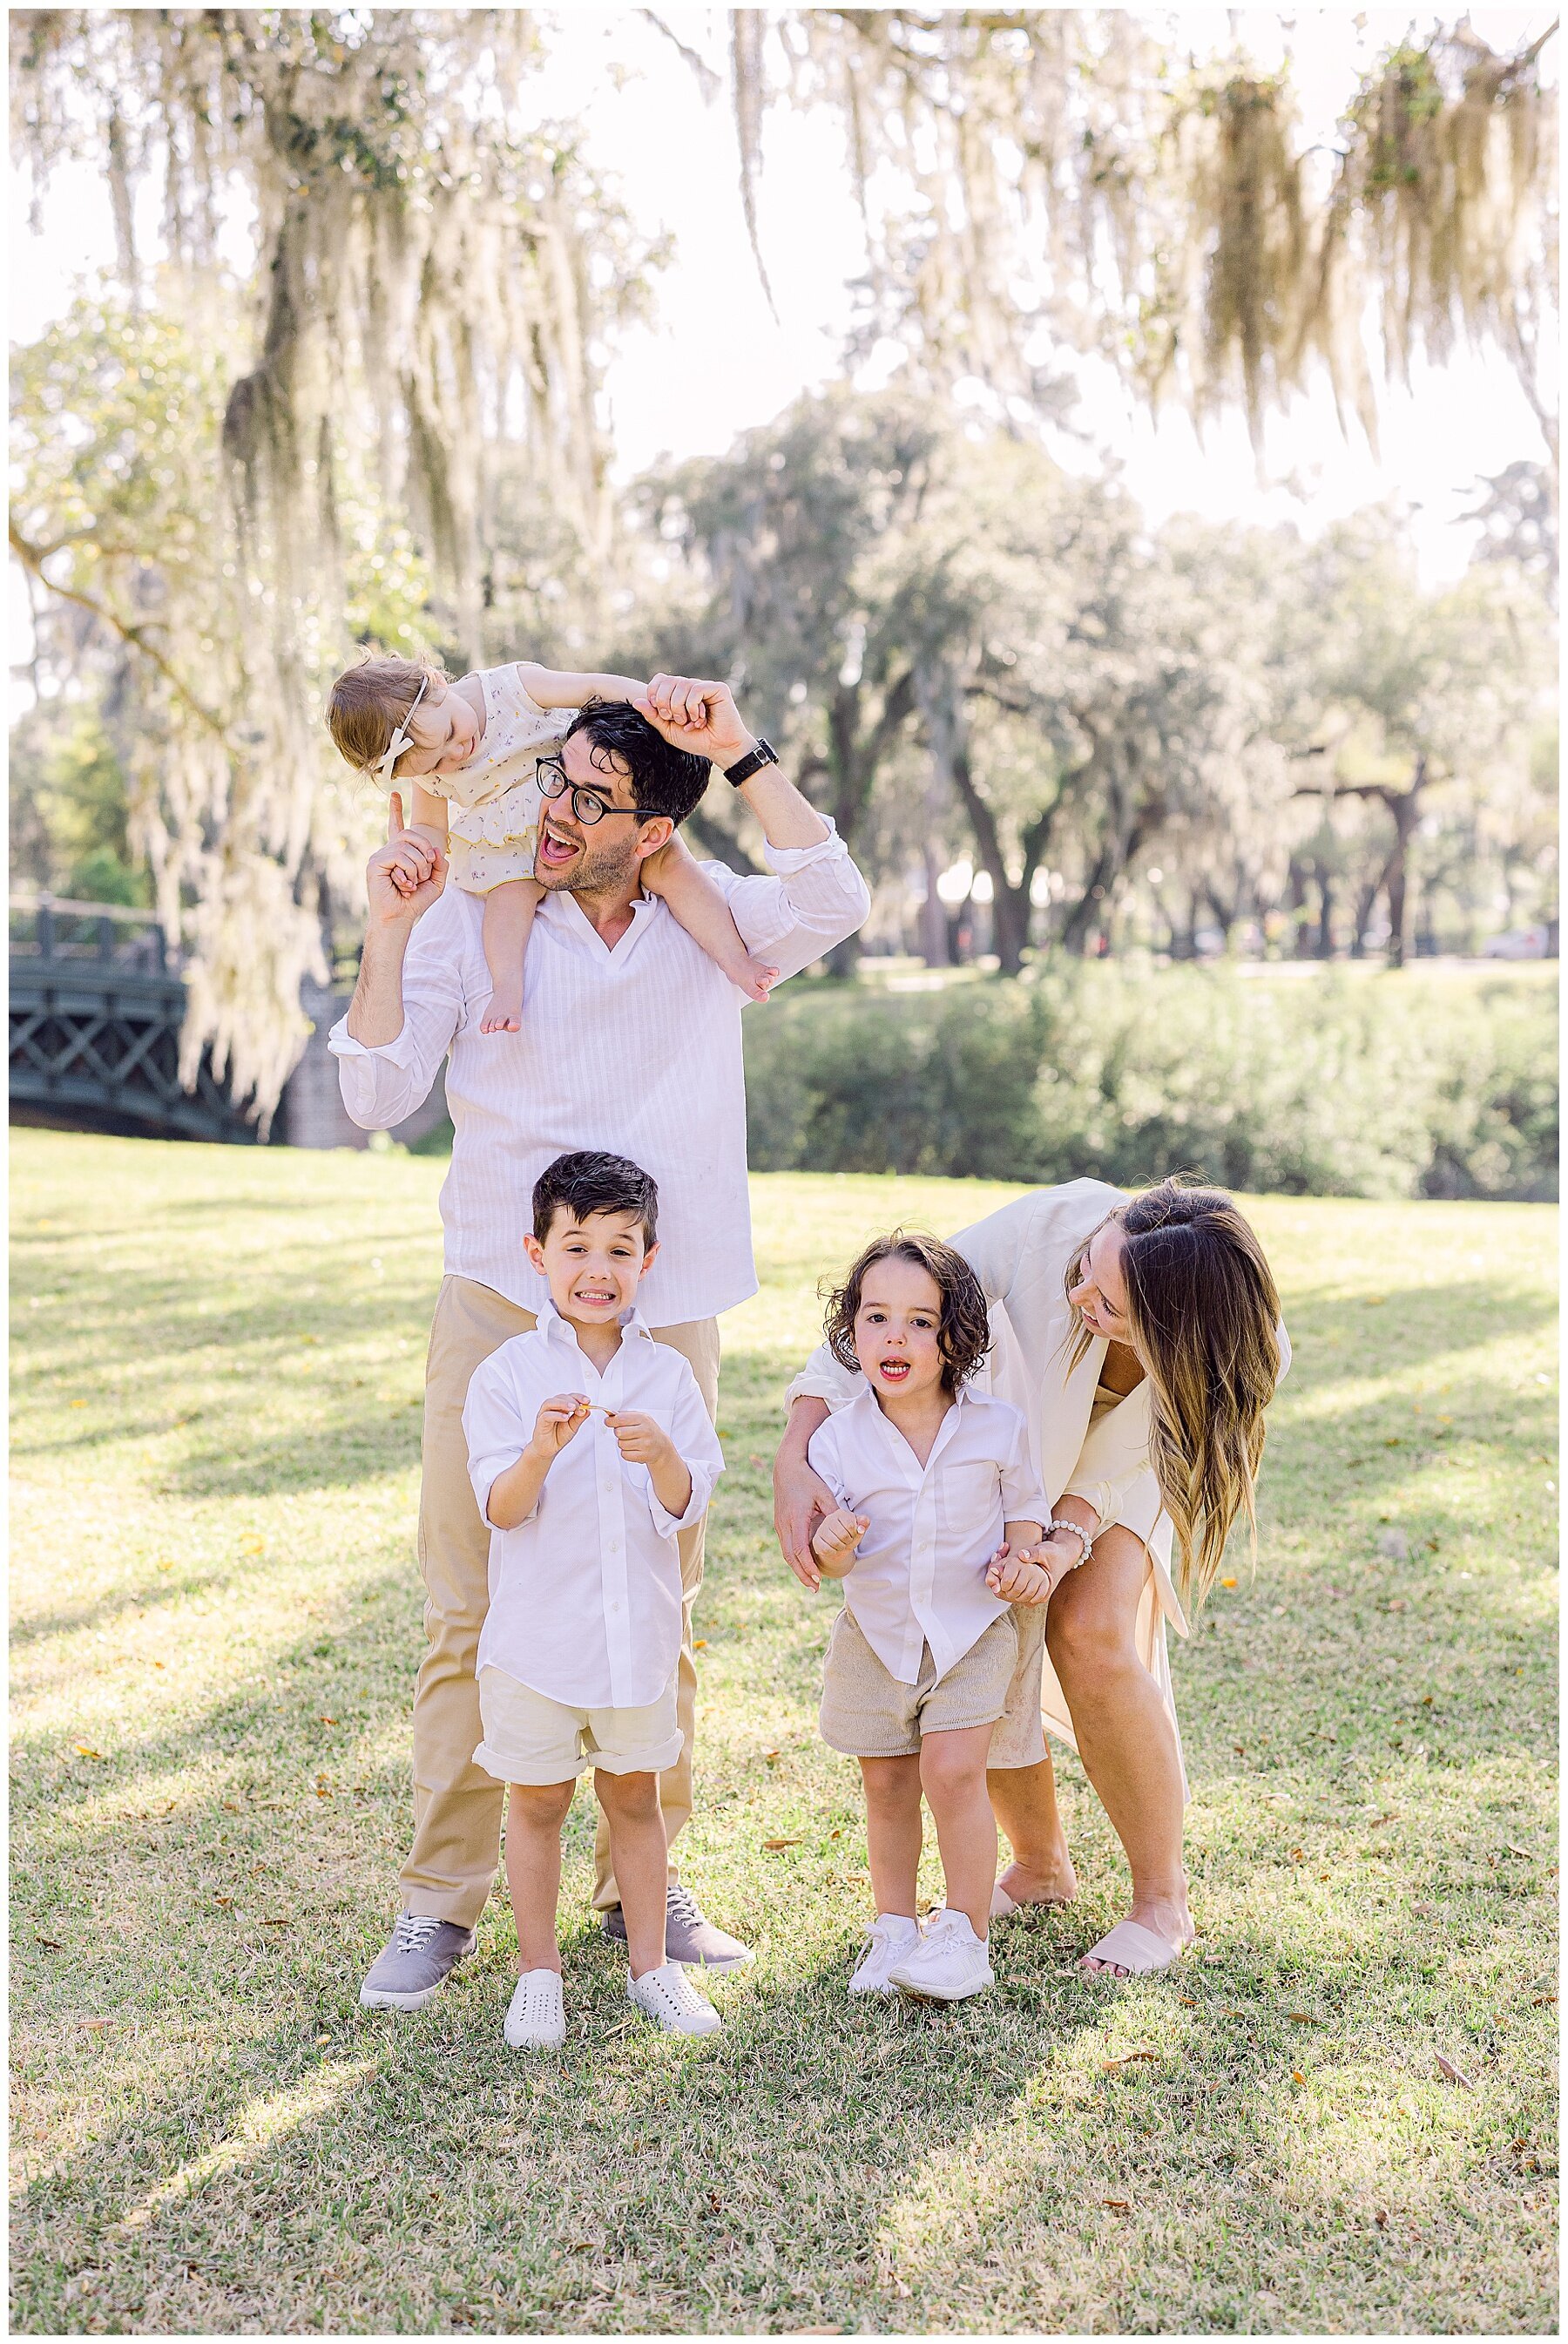 Katherine_Ives_Photography_Sallah_Palmetto_Bluff_Family_Session_18.JPG